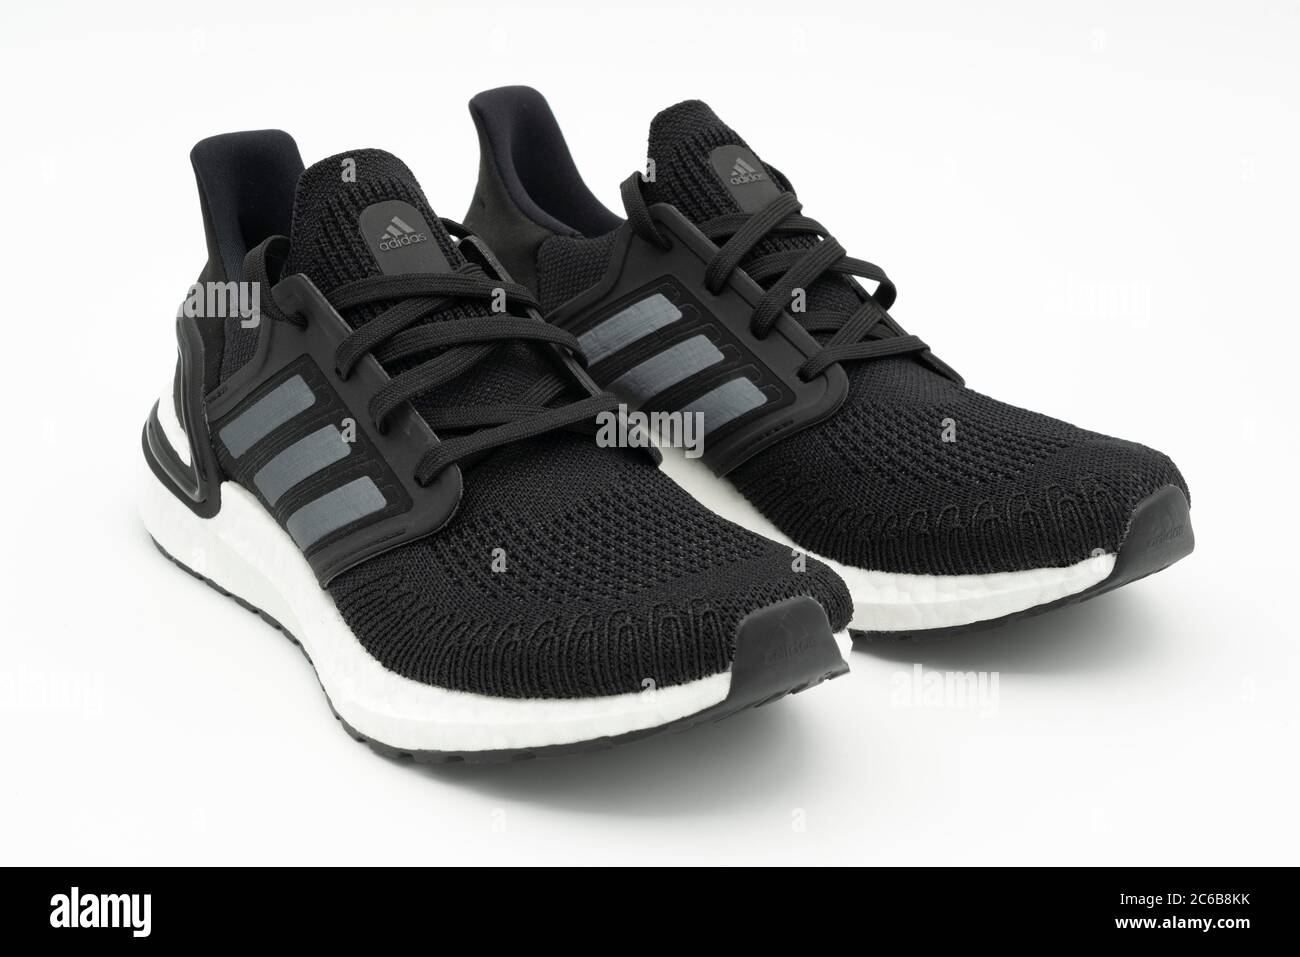 adidas running shoes ultra boost black